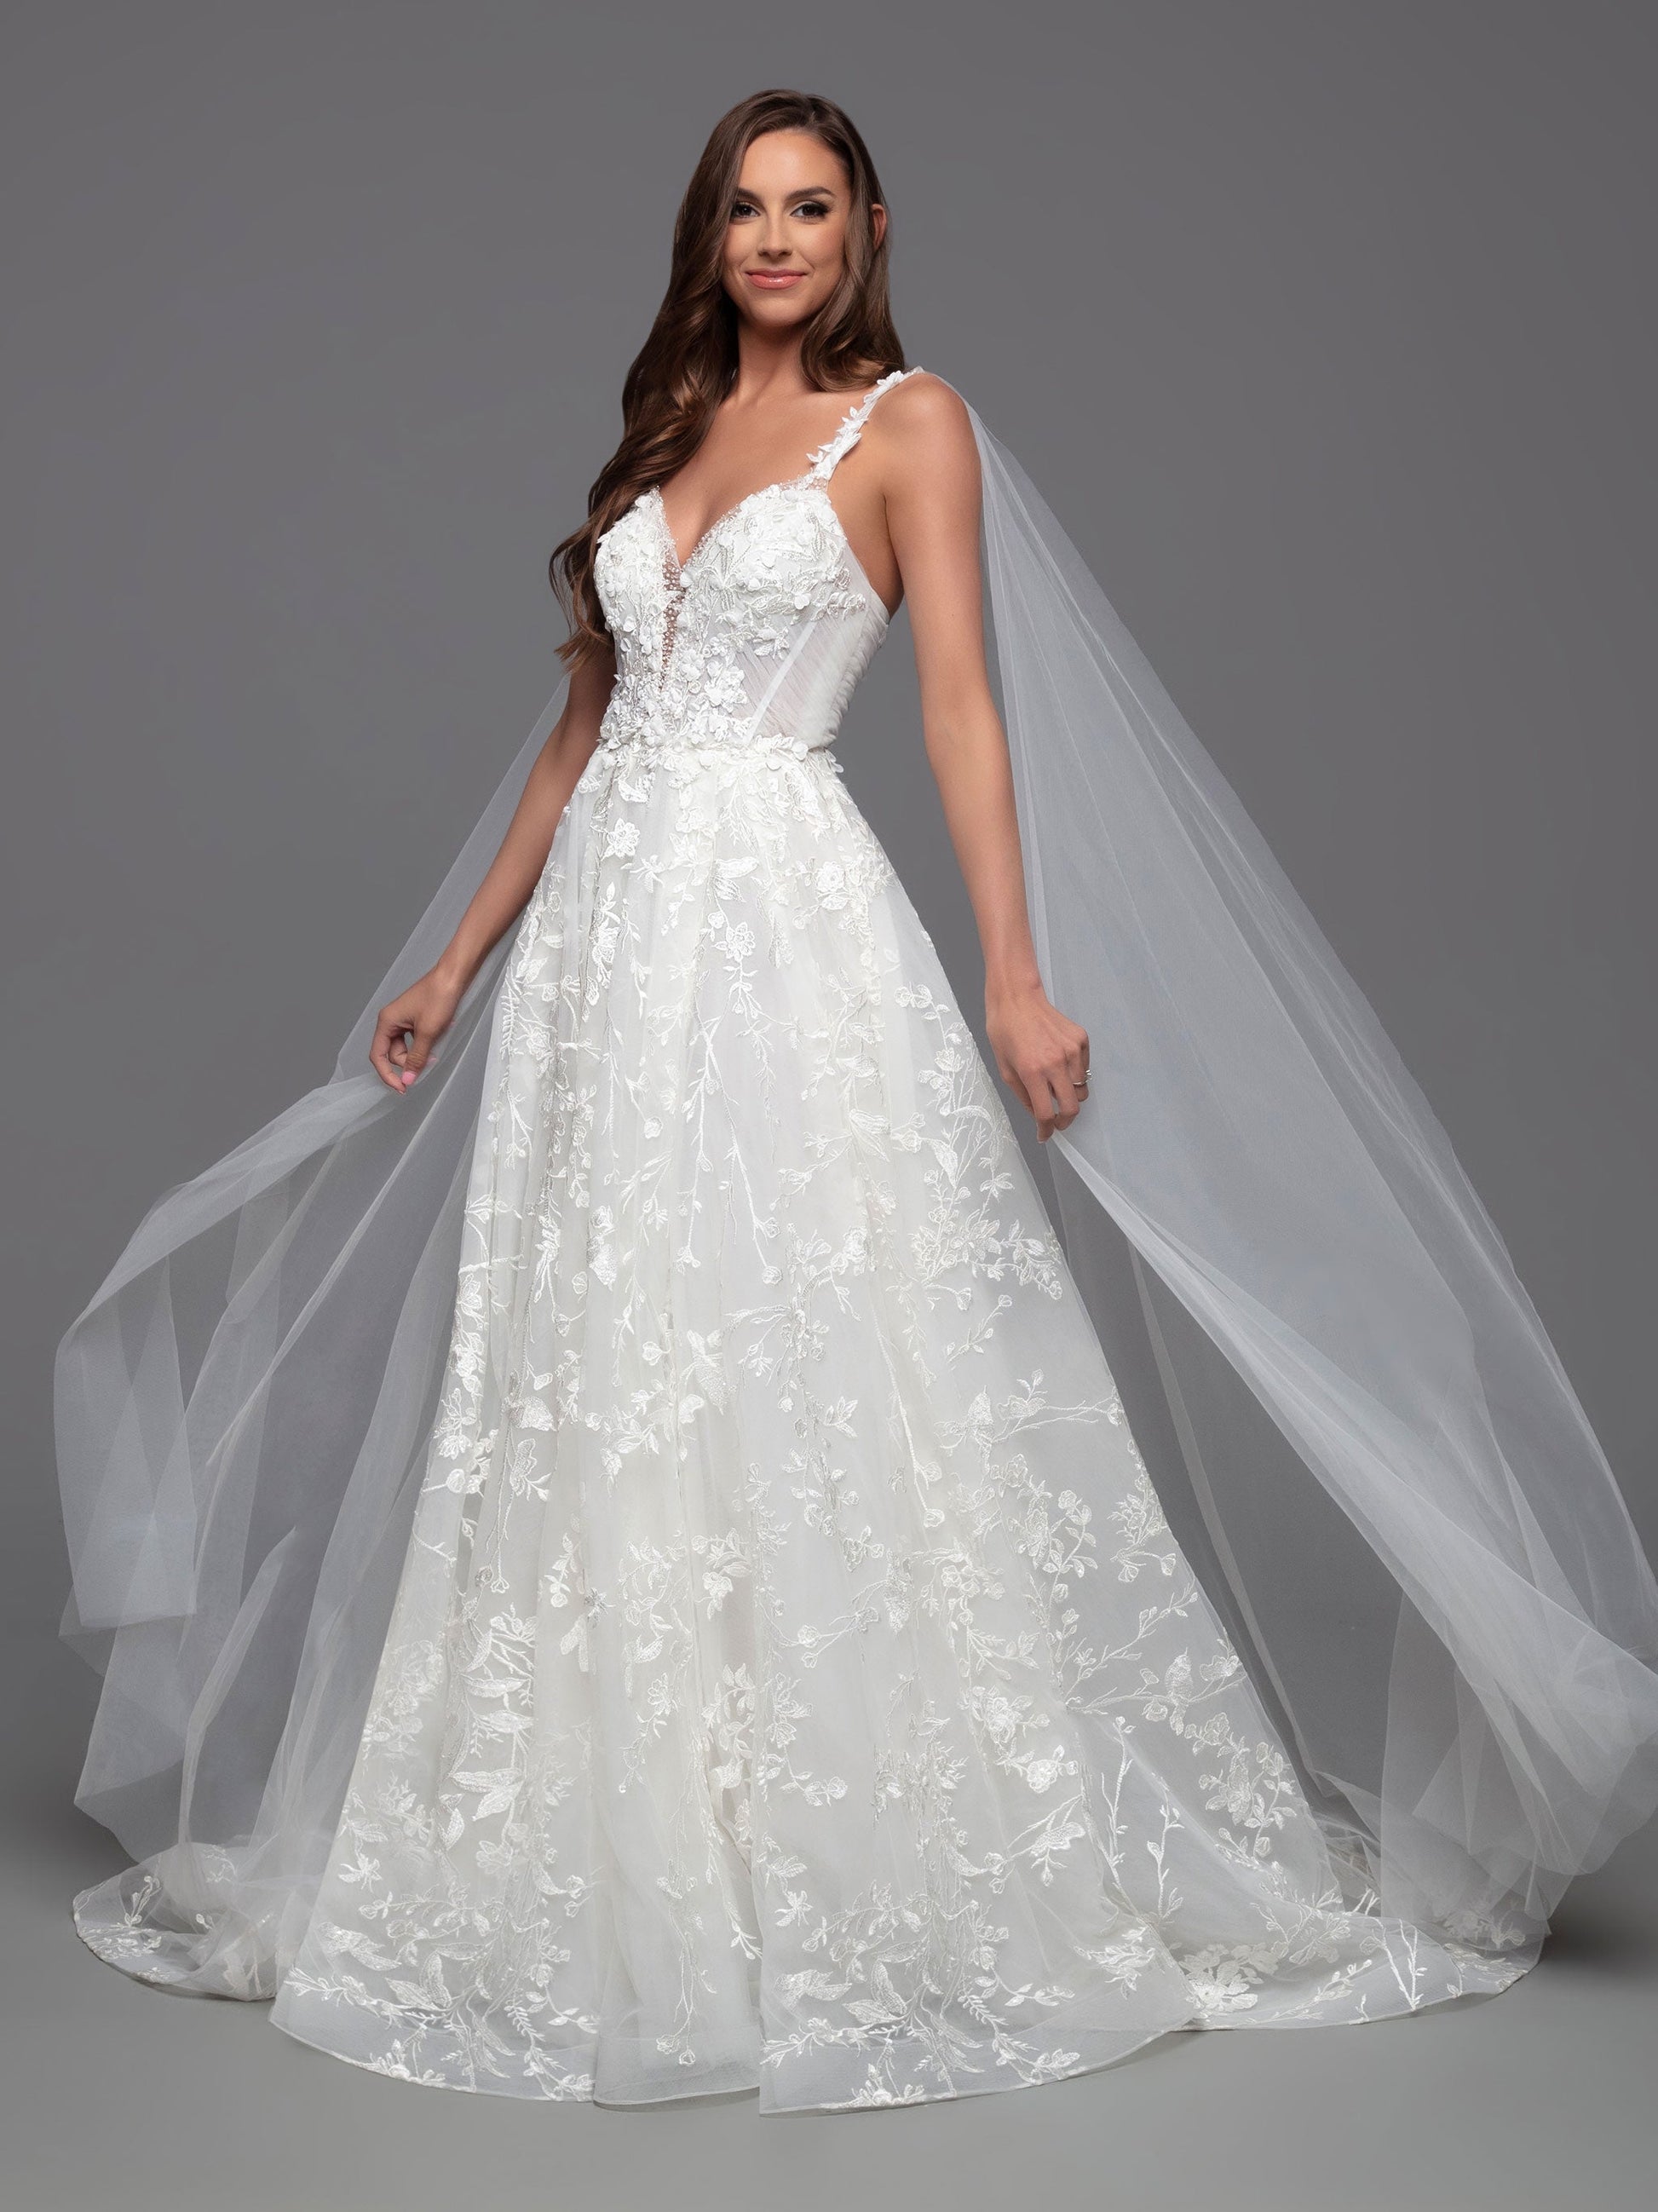 Look stunning on your special day in this Davinci Bridal 50806 A Line Lace Cape Wedding Dress. Constructed with a sheer crystal plunging neckline and 3D floral embroidery on the front and back bodice, this gown provides an exquisite look with gathered skirt and chapel train. Plus, you can customize your look and stand out in photos with the addition of the detachable veil wings.  Sizes: 2-20  Colors: Ivory